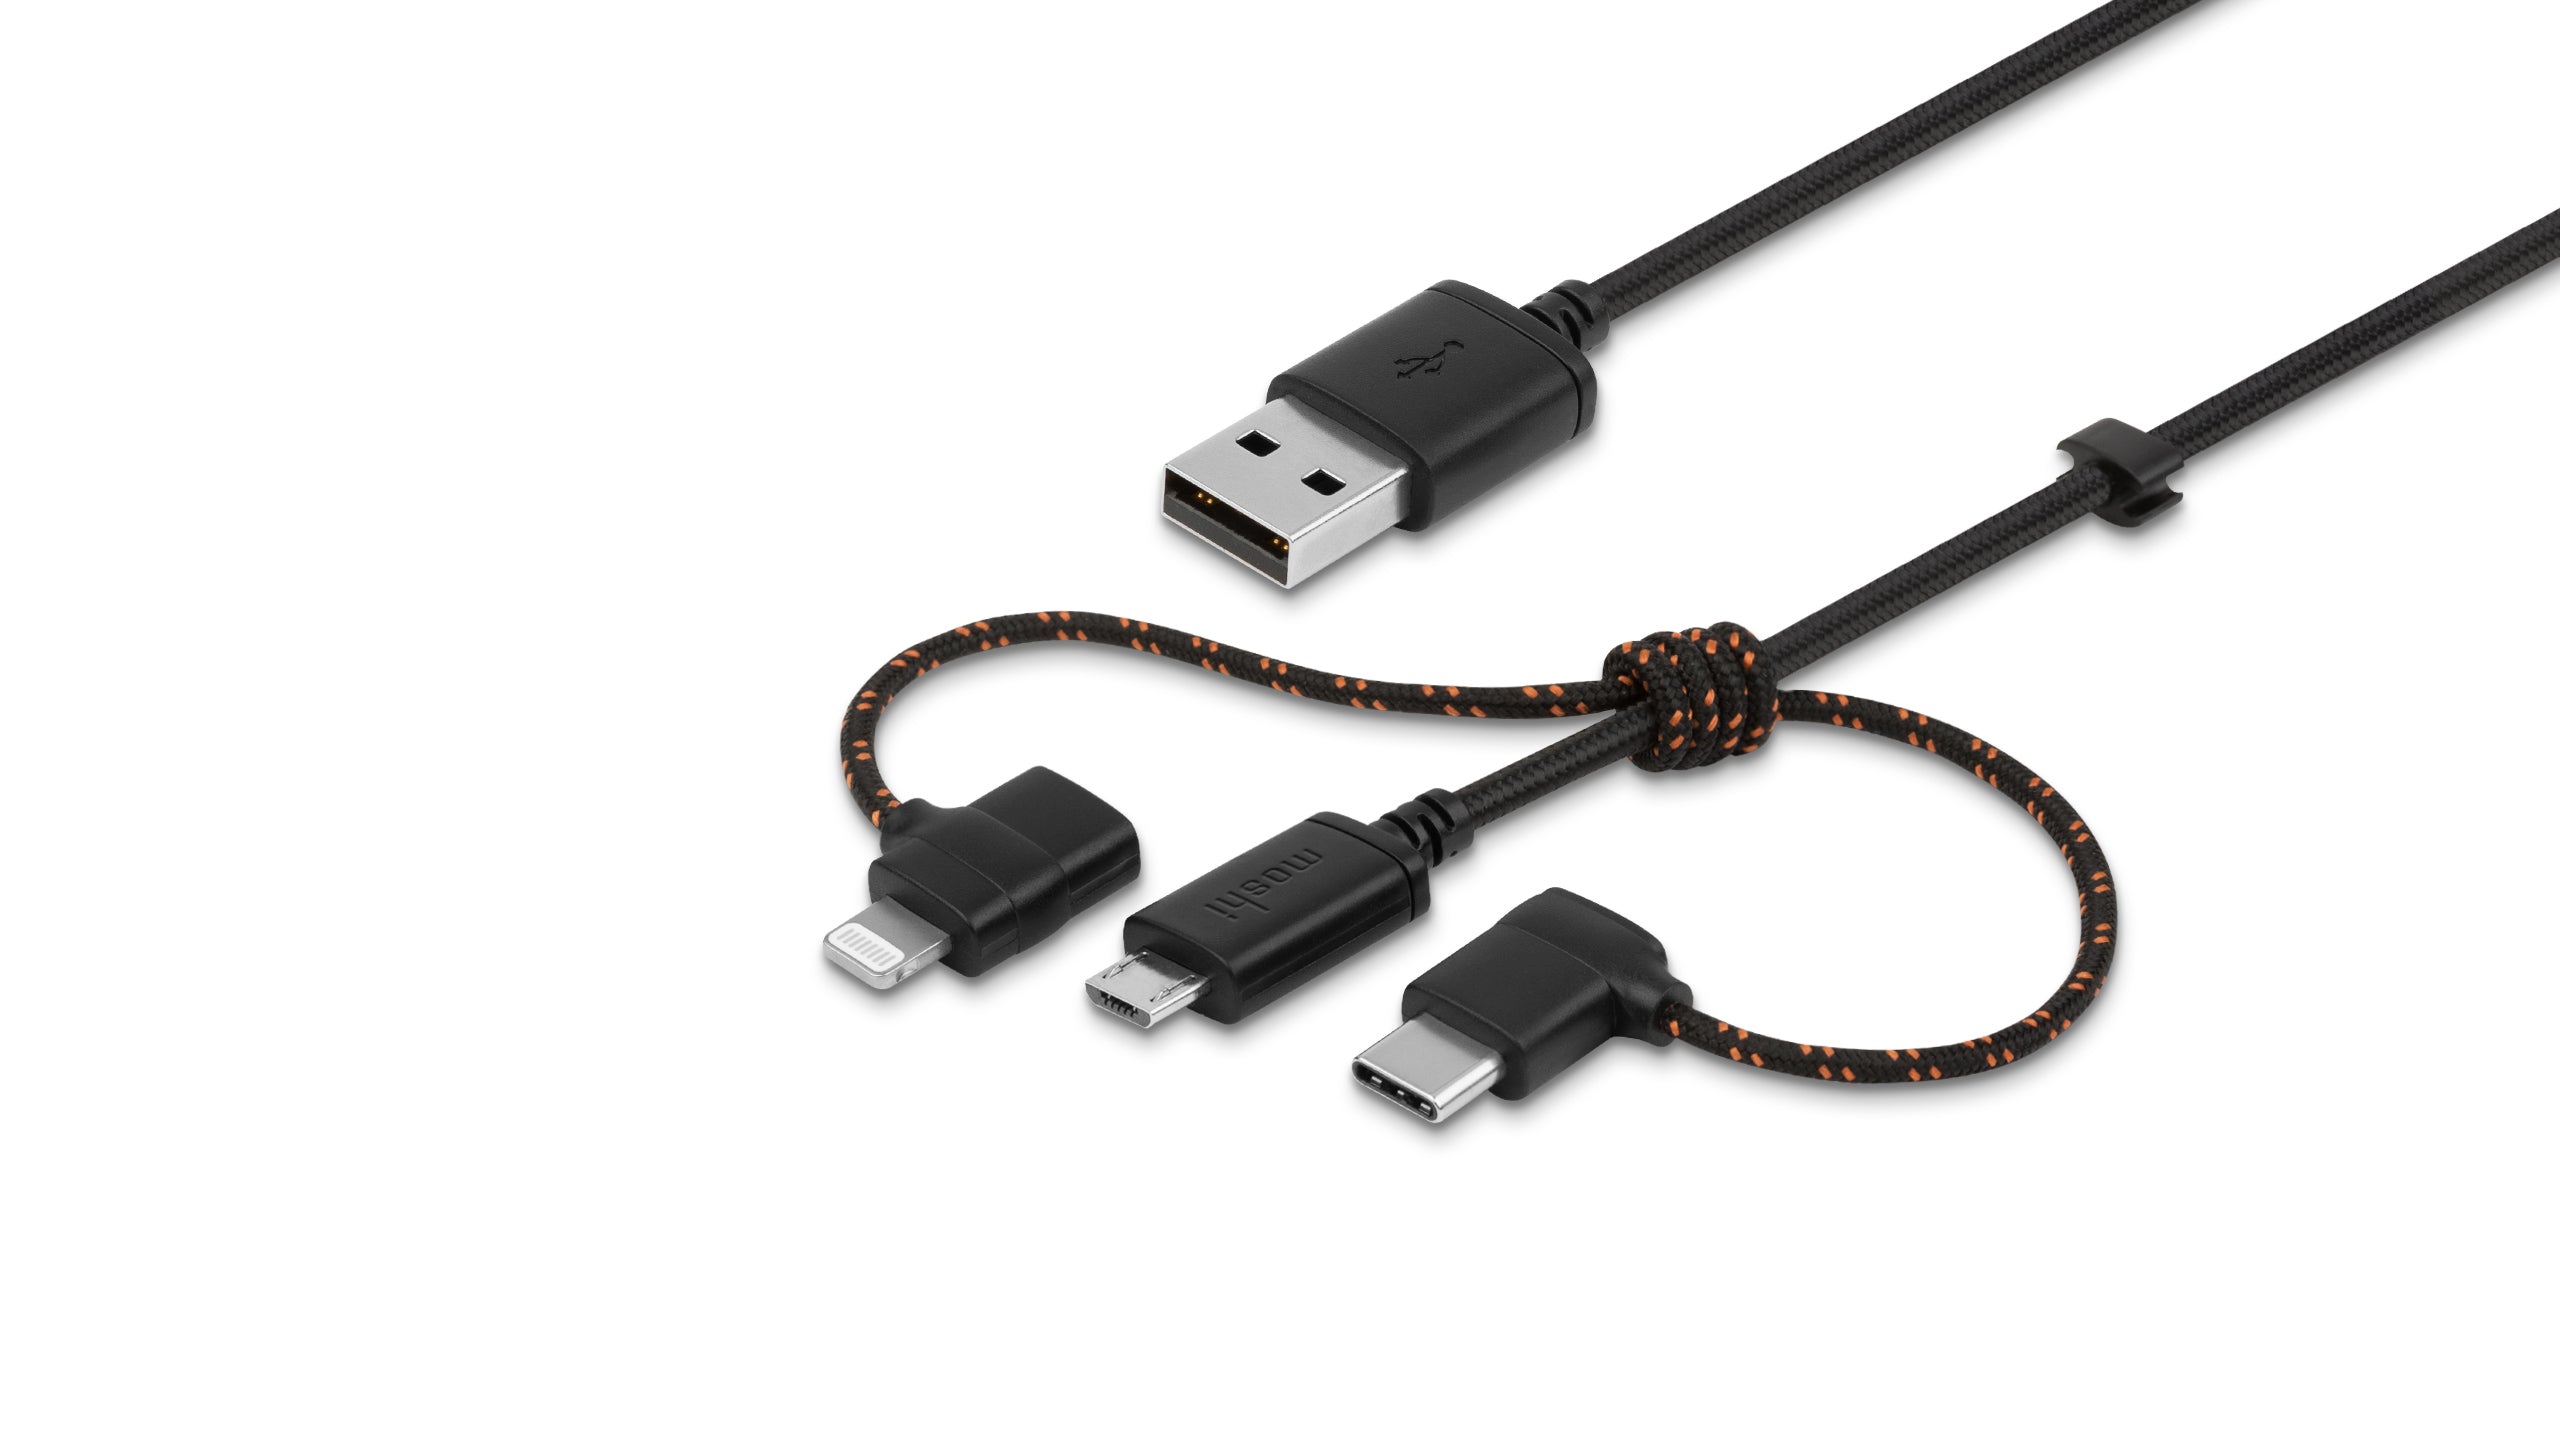 3-in-1 Universal Charging Cable - Metro Black